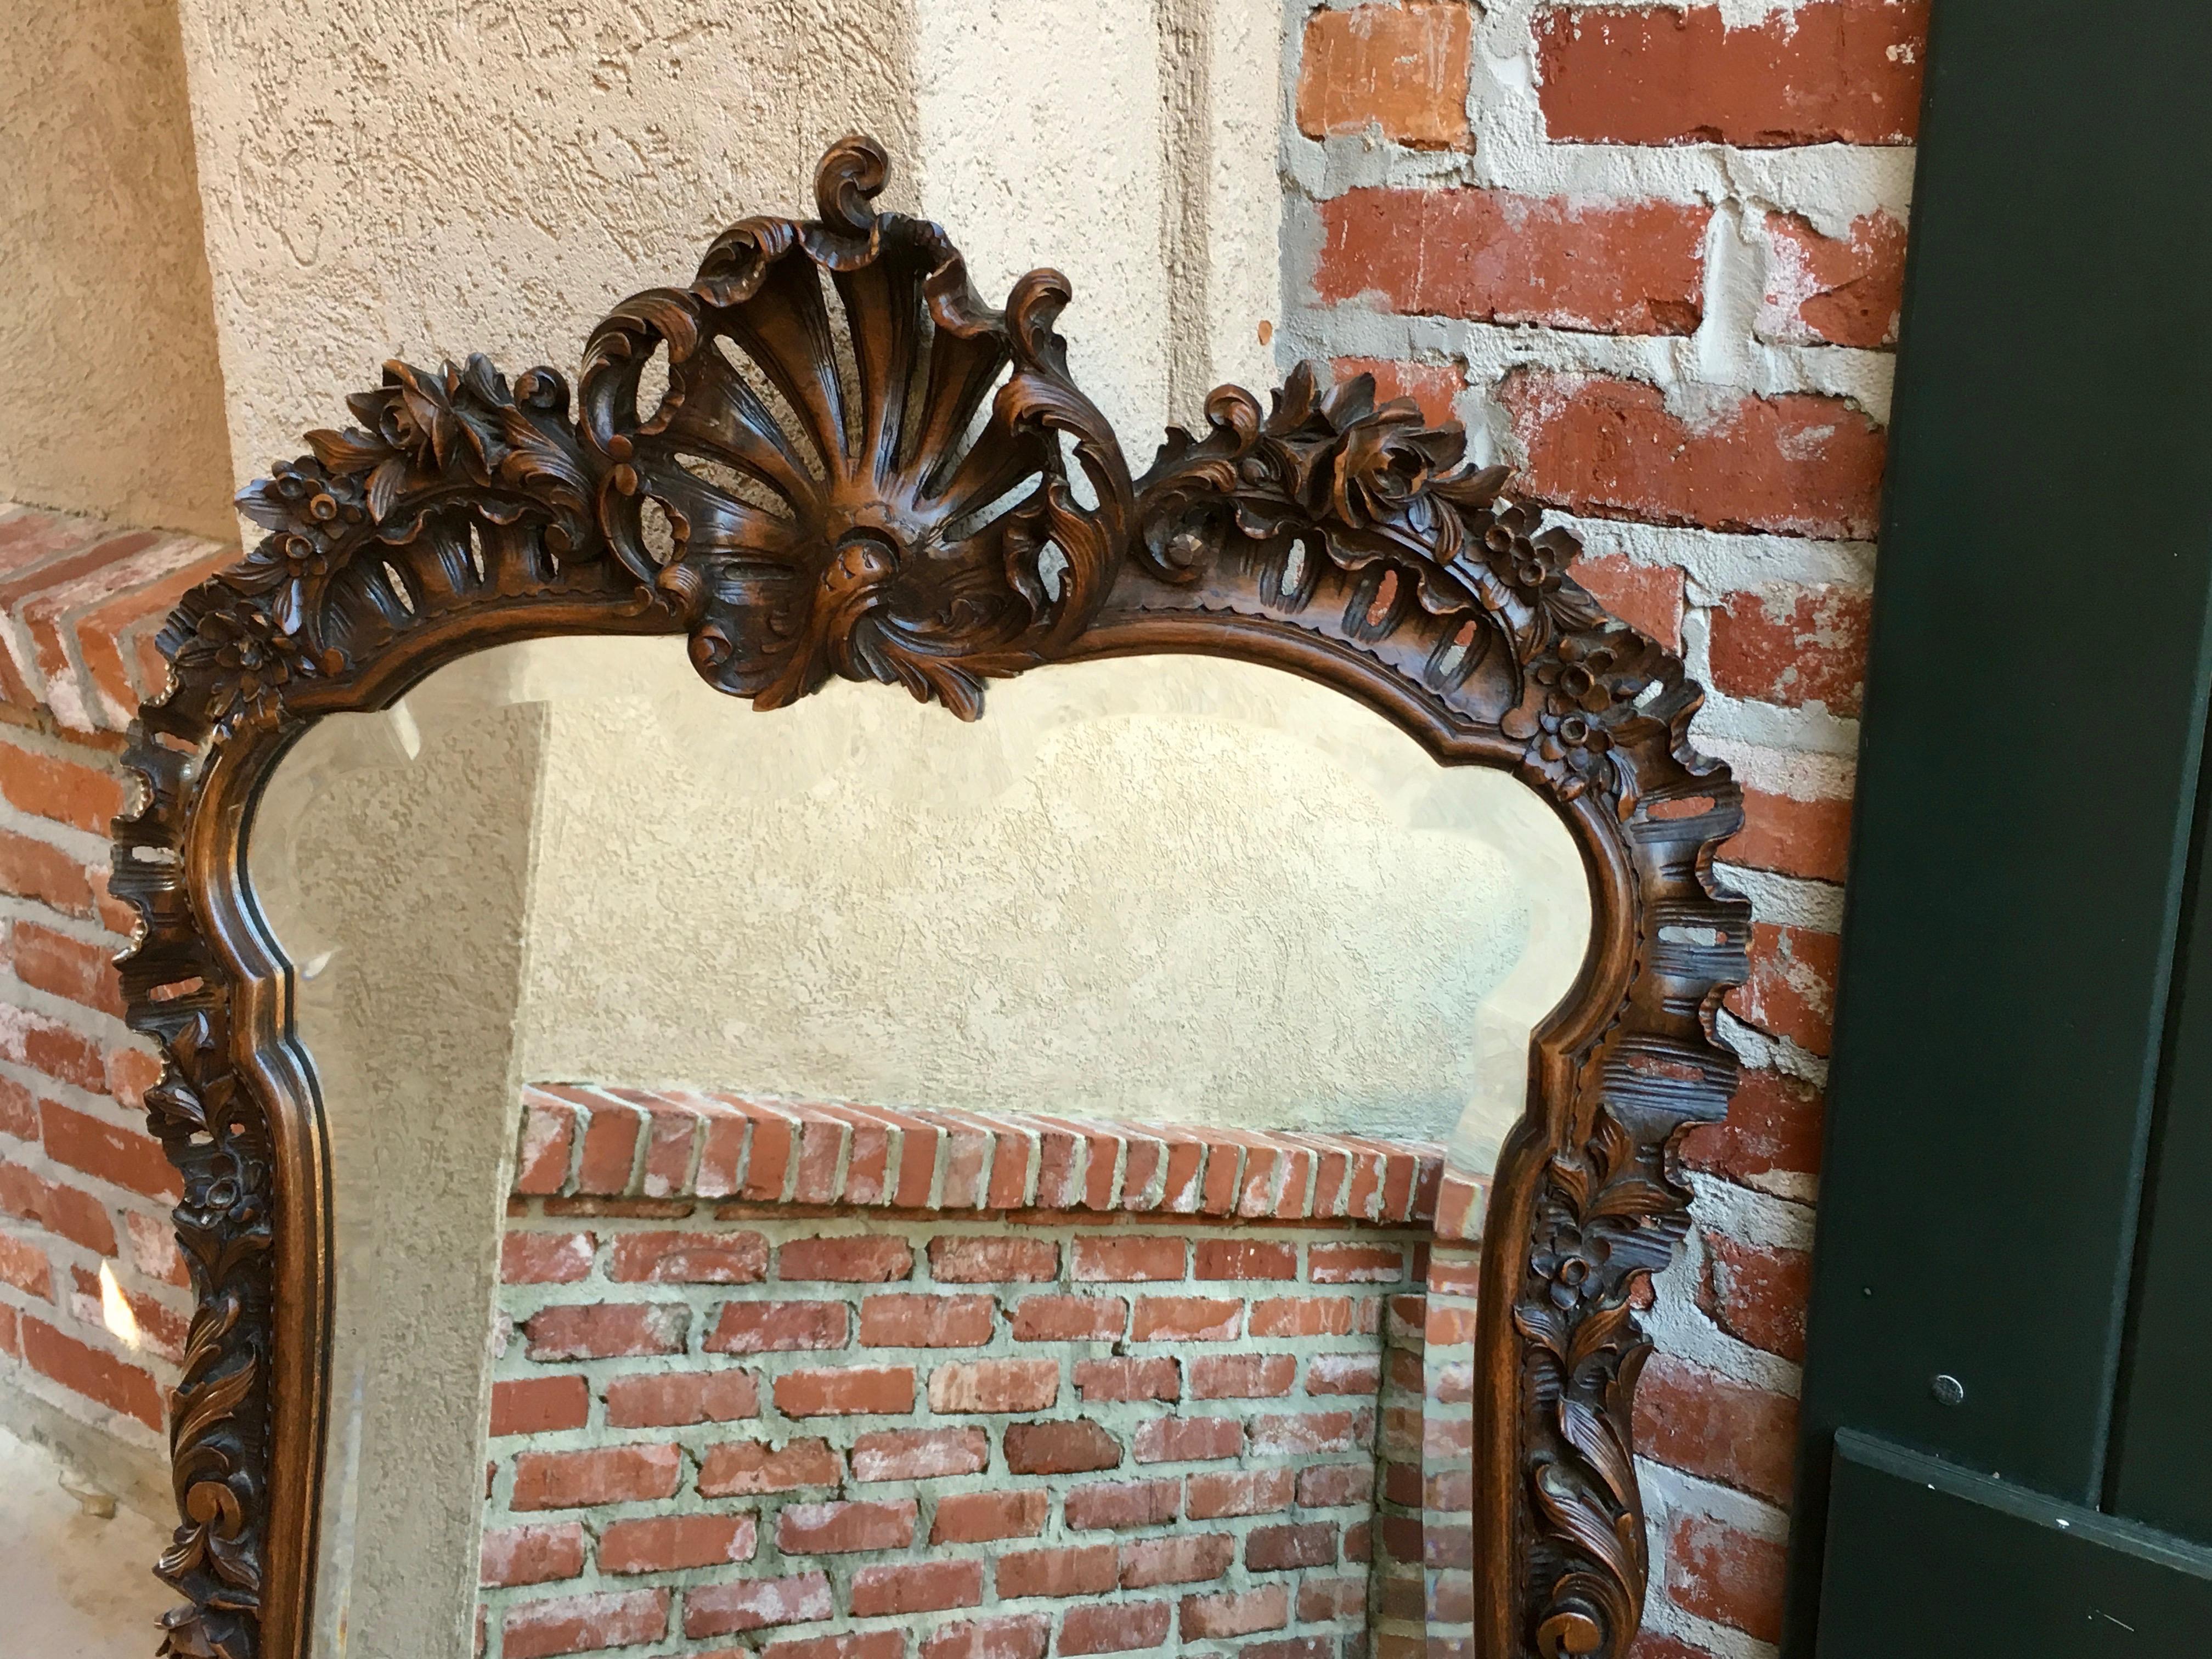 Direct from France, a beautiful antique carved oak frame wall mirror with exquisite hand carved details. From the top of the huge open carved crown, down the sides completely embellished with scrolls and foliage, all the way to the open carved